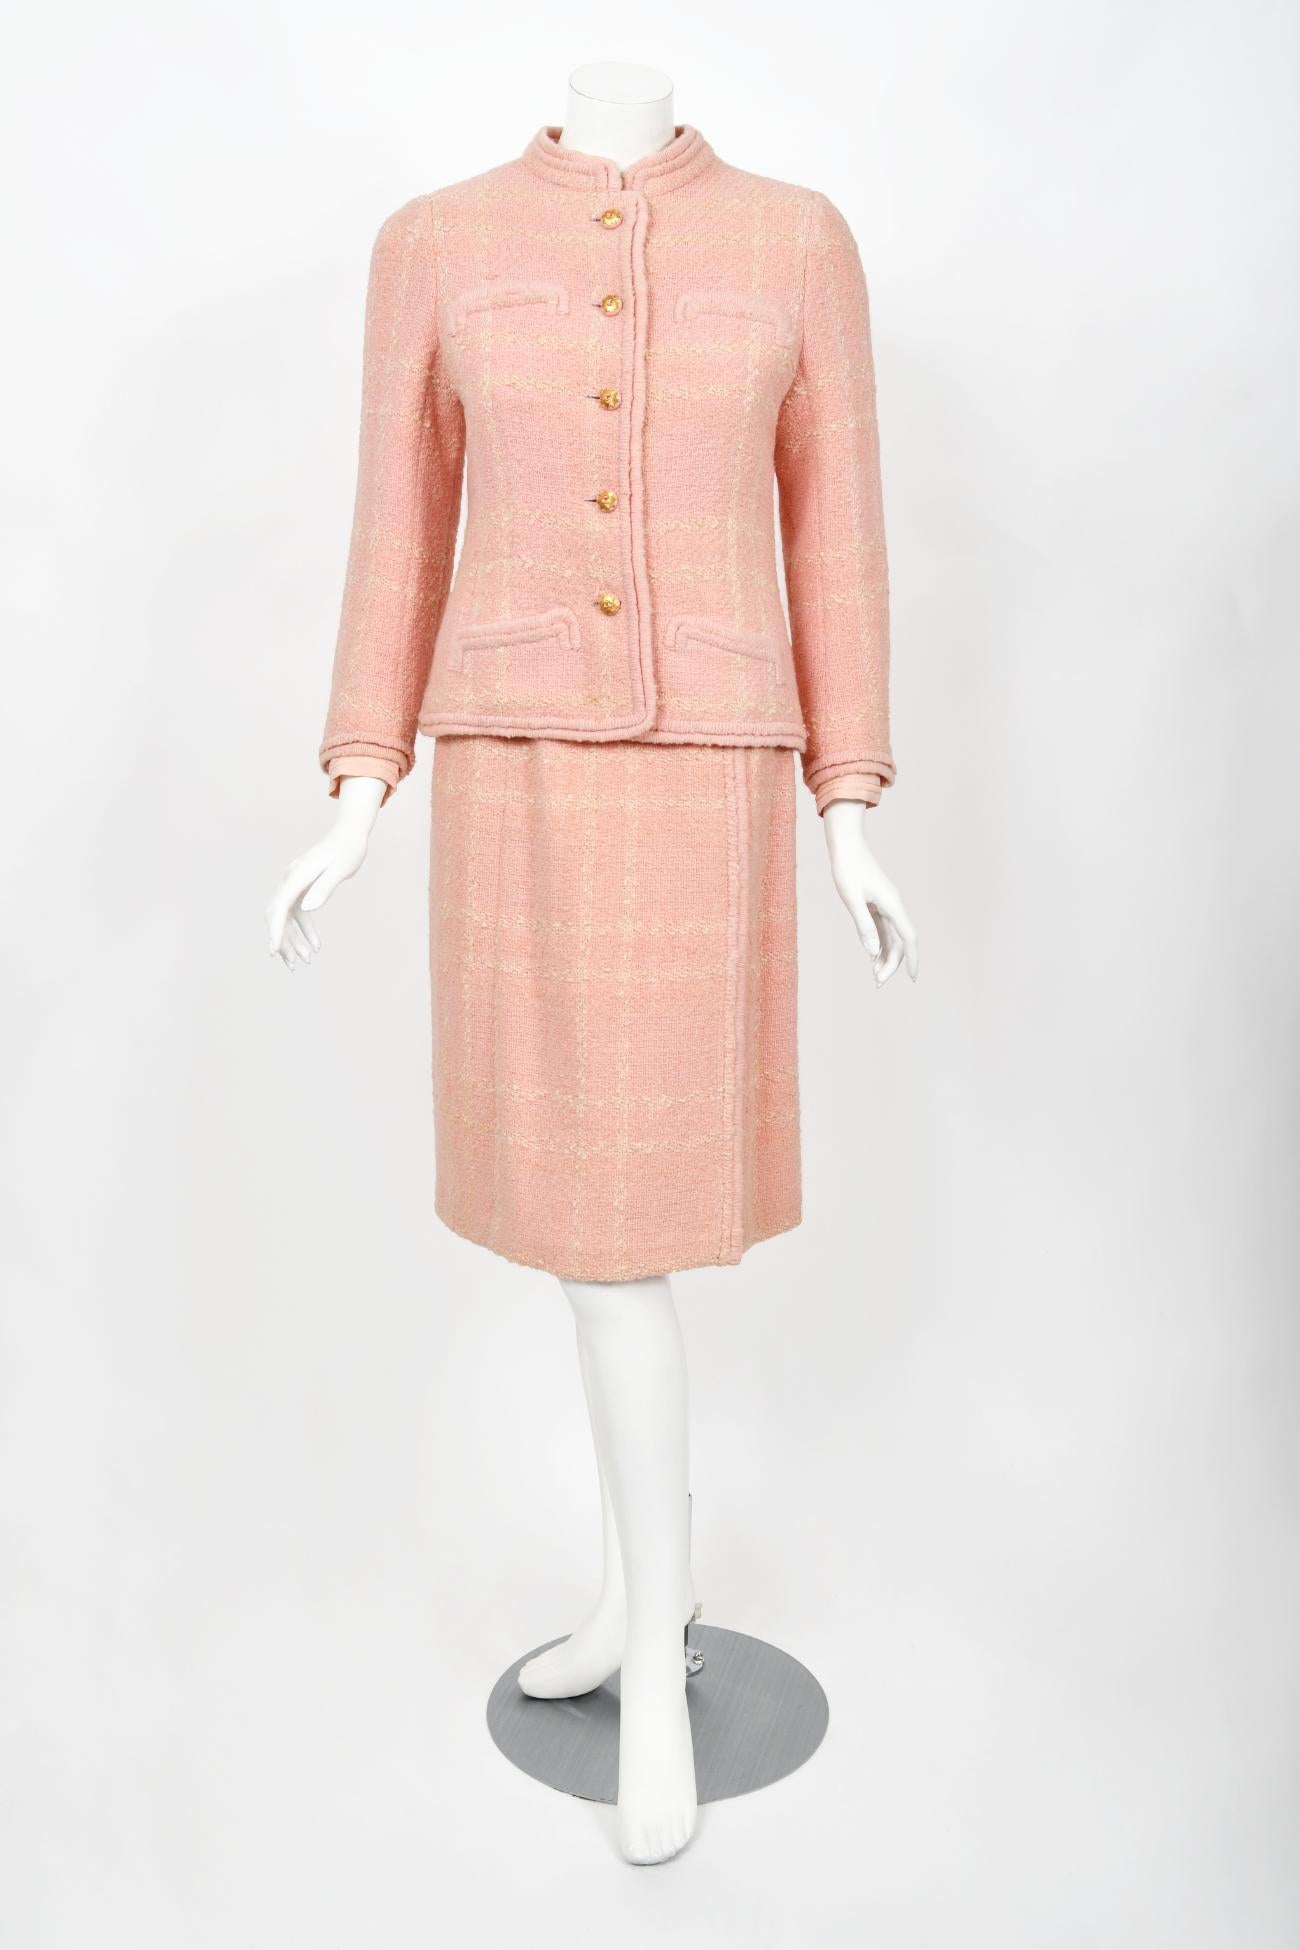 Vintage 1973 Chanel Haute Couture Documented Pink Wool Jacket Blouse Skirt Suit For Sale 6